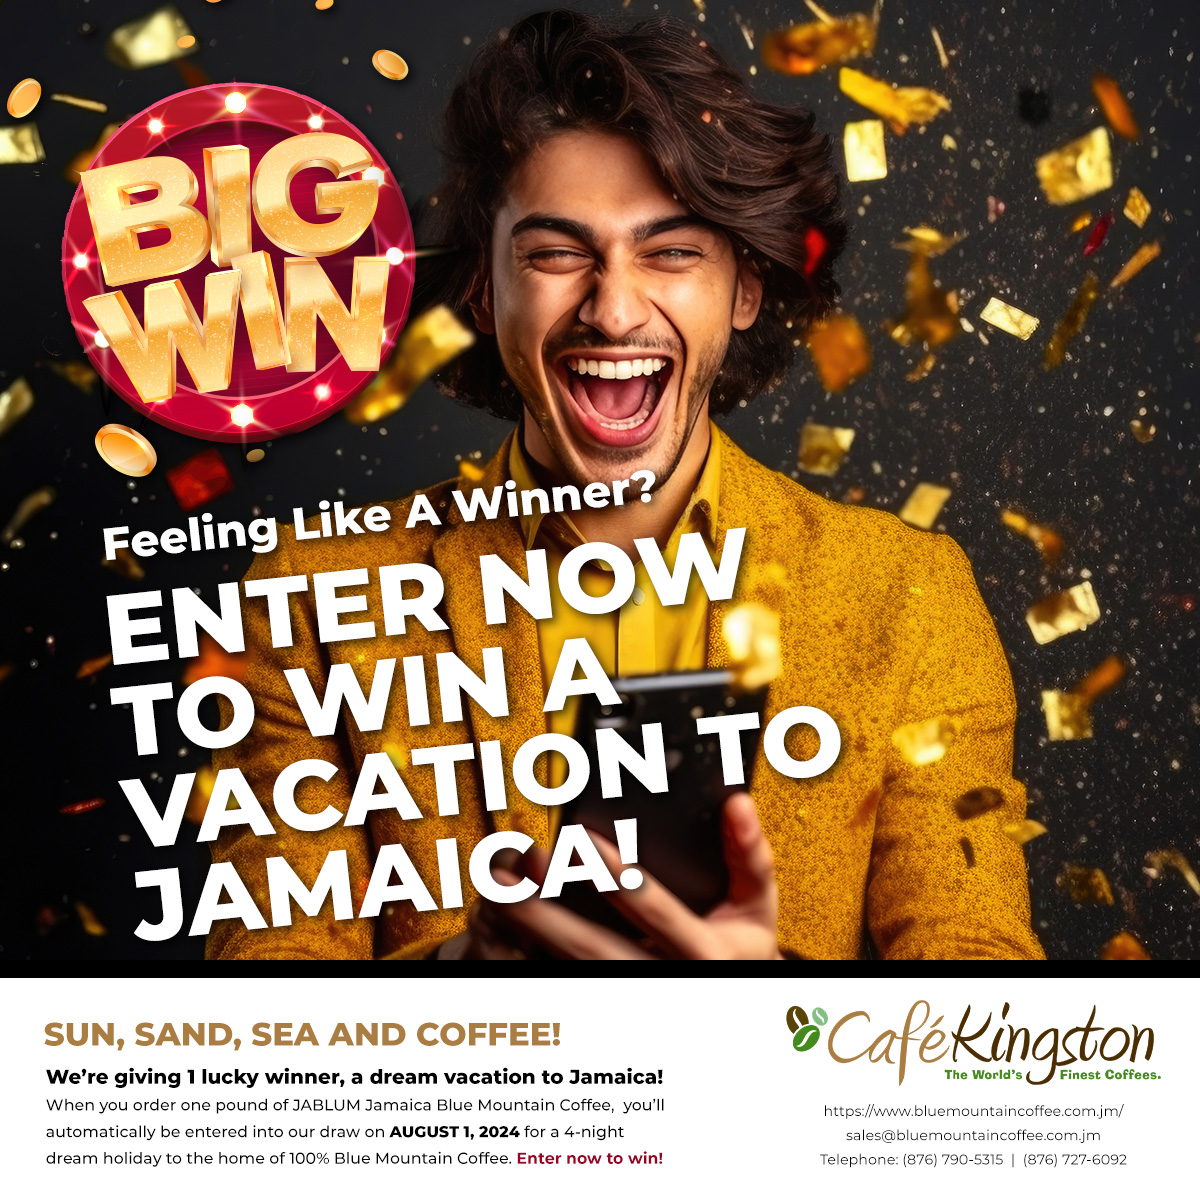 Are you feeling like a winner? Enter now to win a dream vacation to Jamaica!